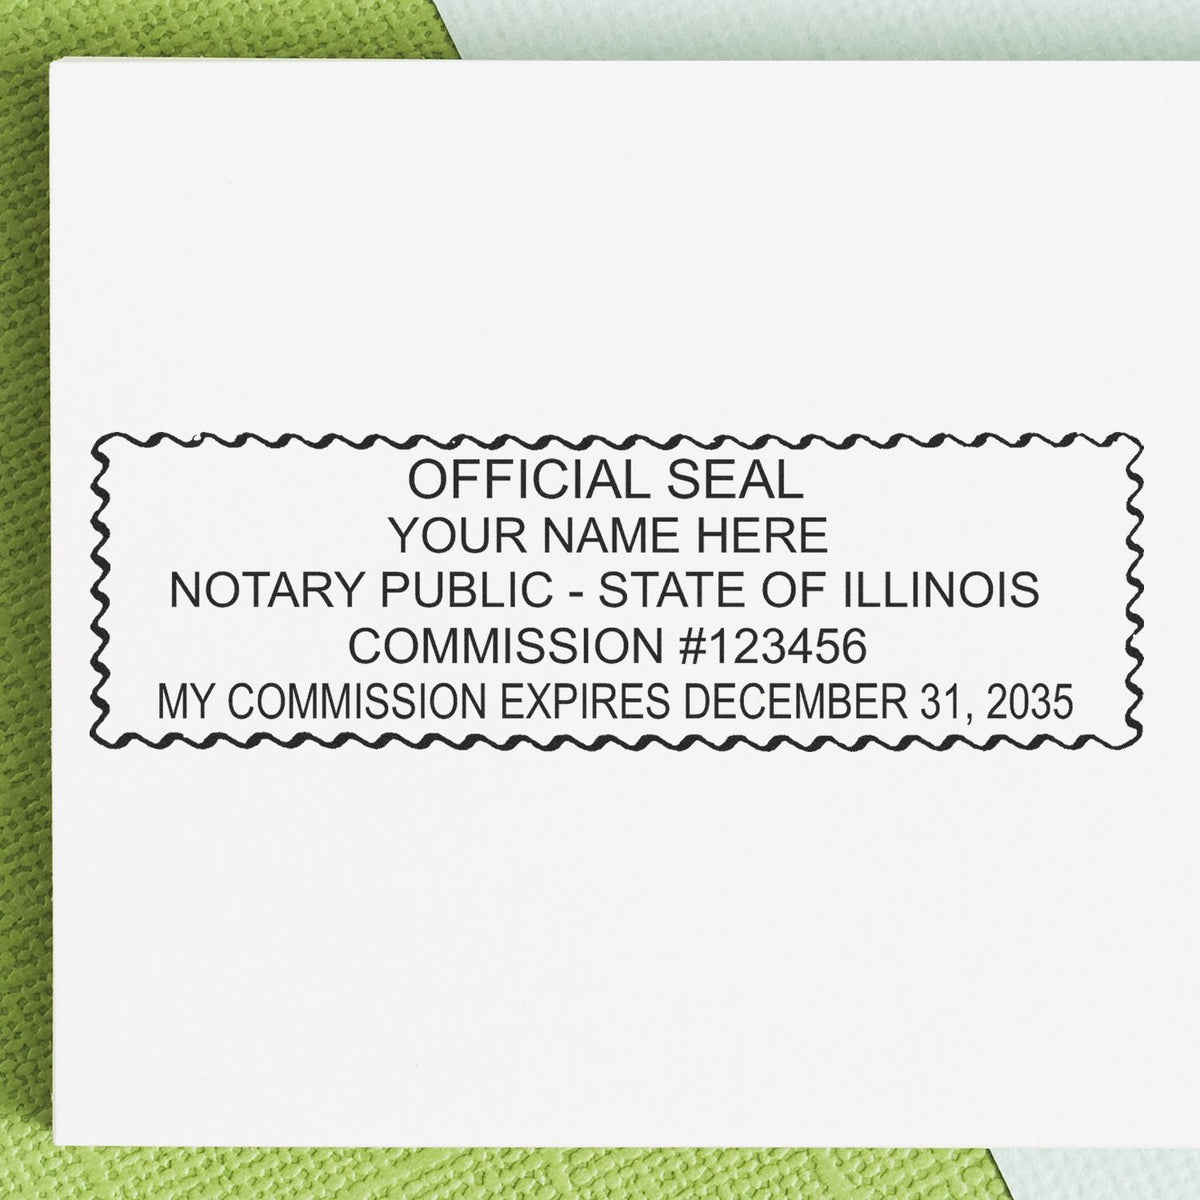 An alternative view of the PSI Illinois Notary Stamp stamped on a sheet of paper showing the image in use